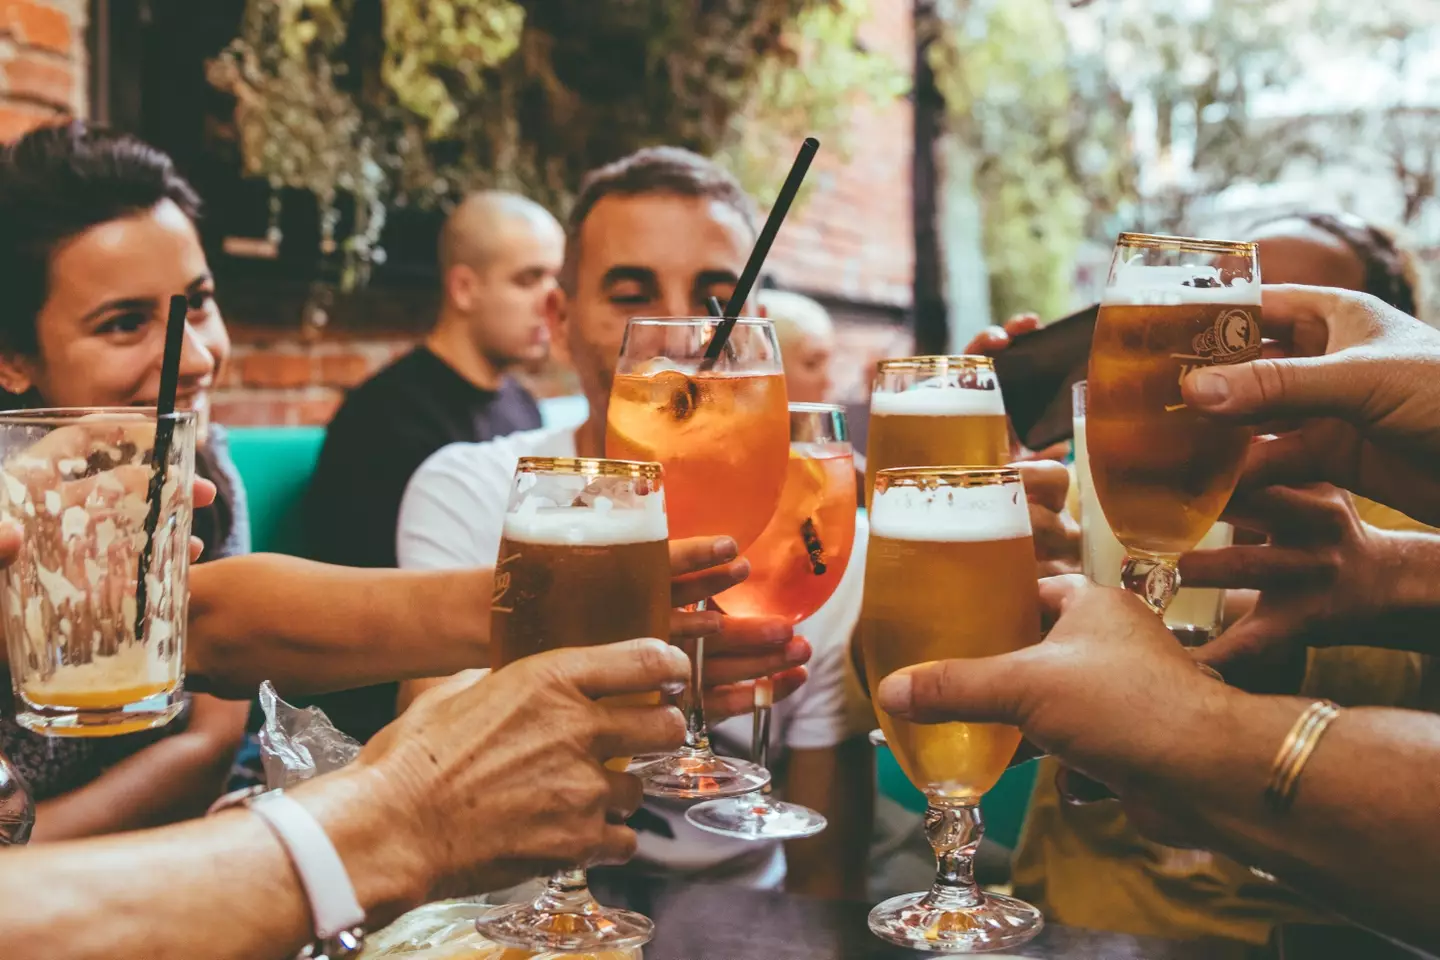 Drinking beer to cool down can actually backfire, according to a medical expert.